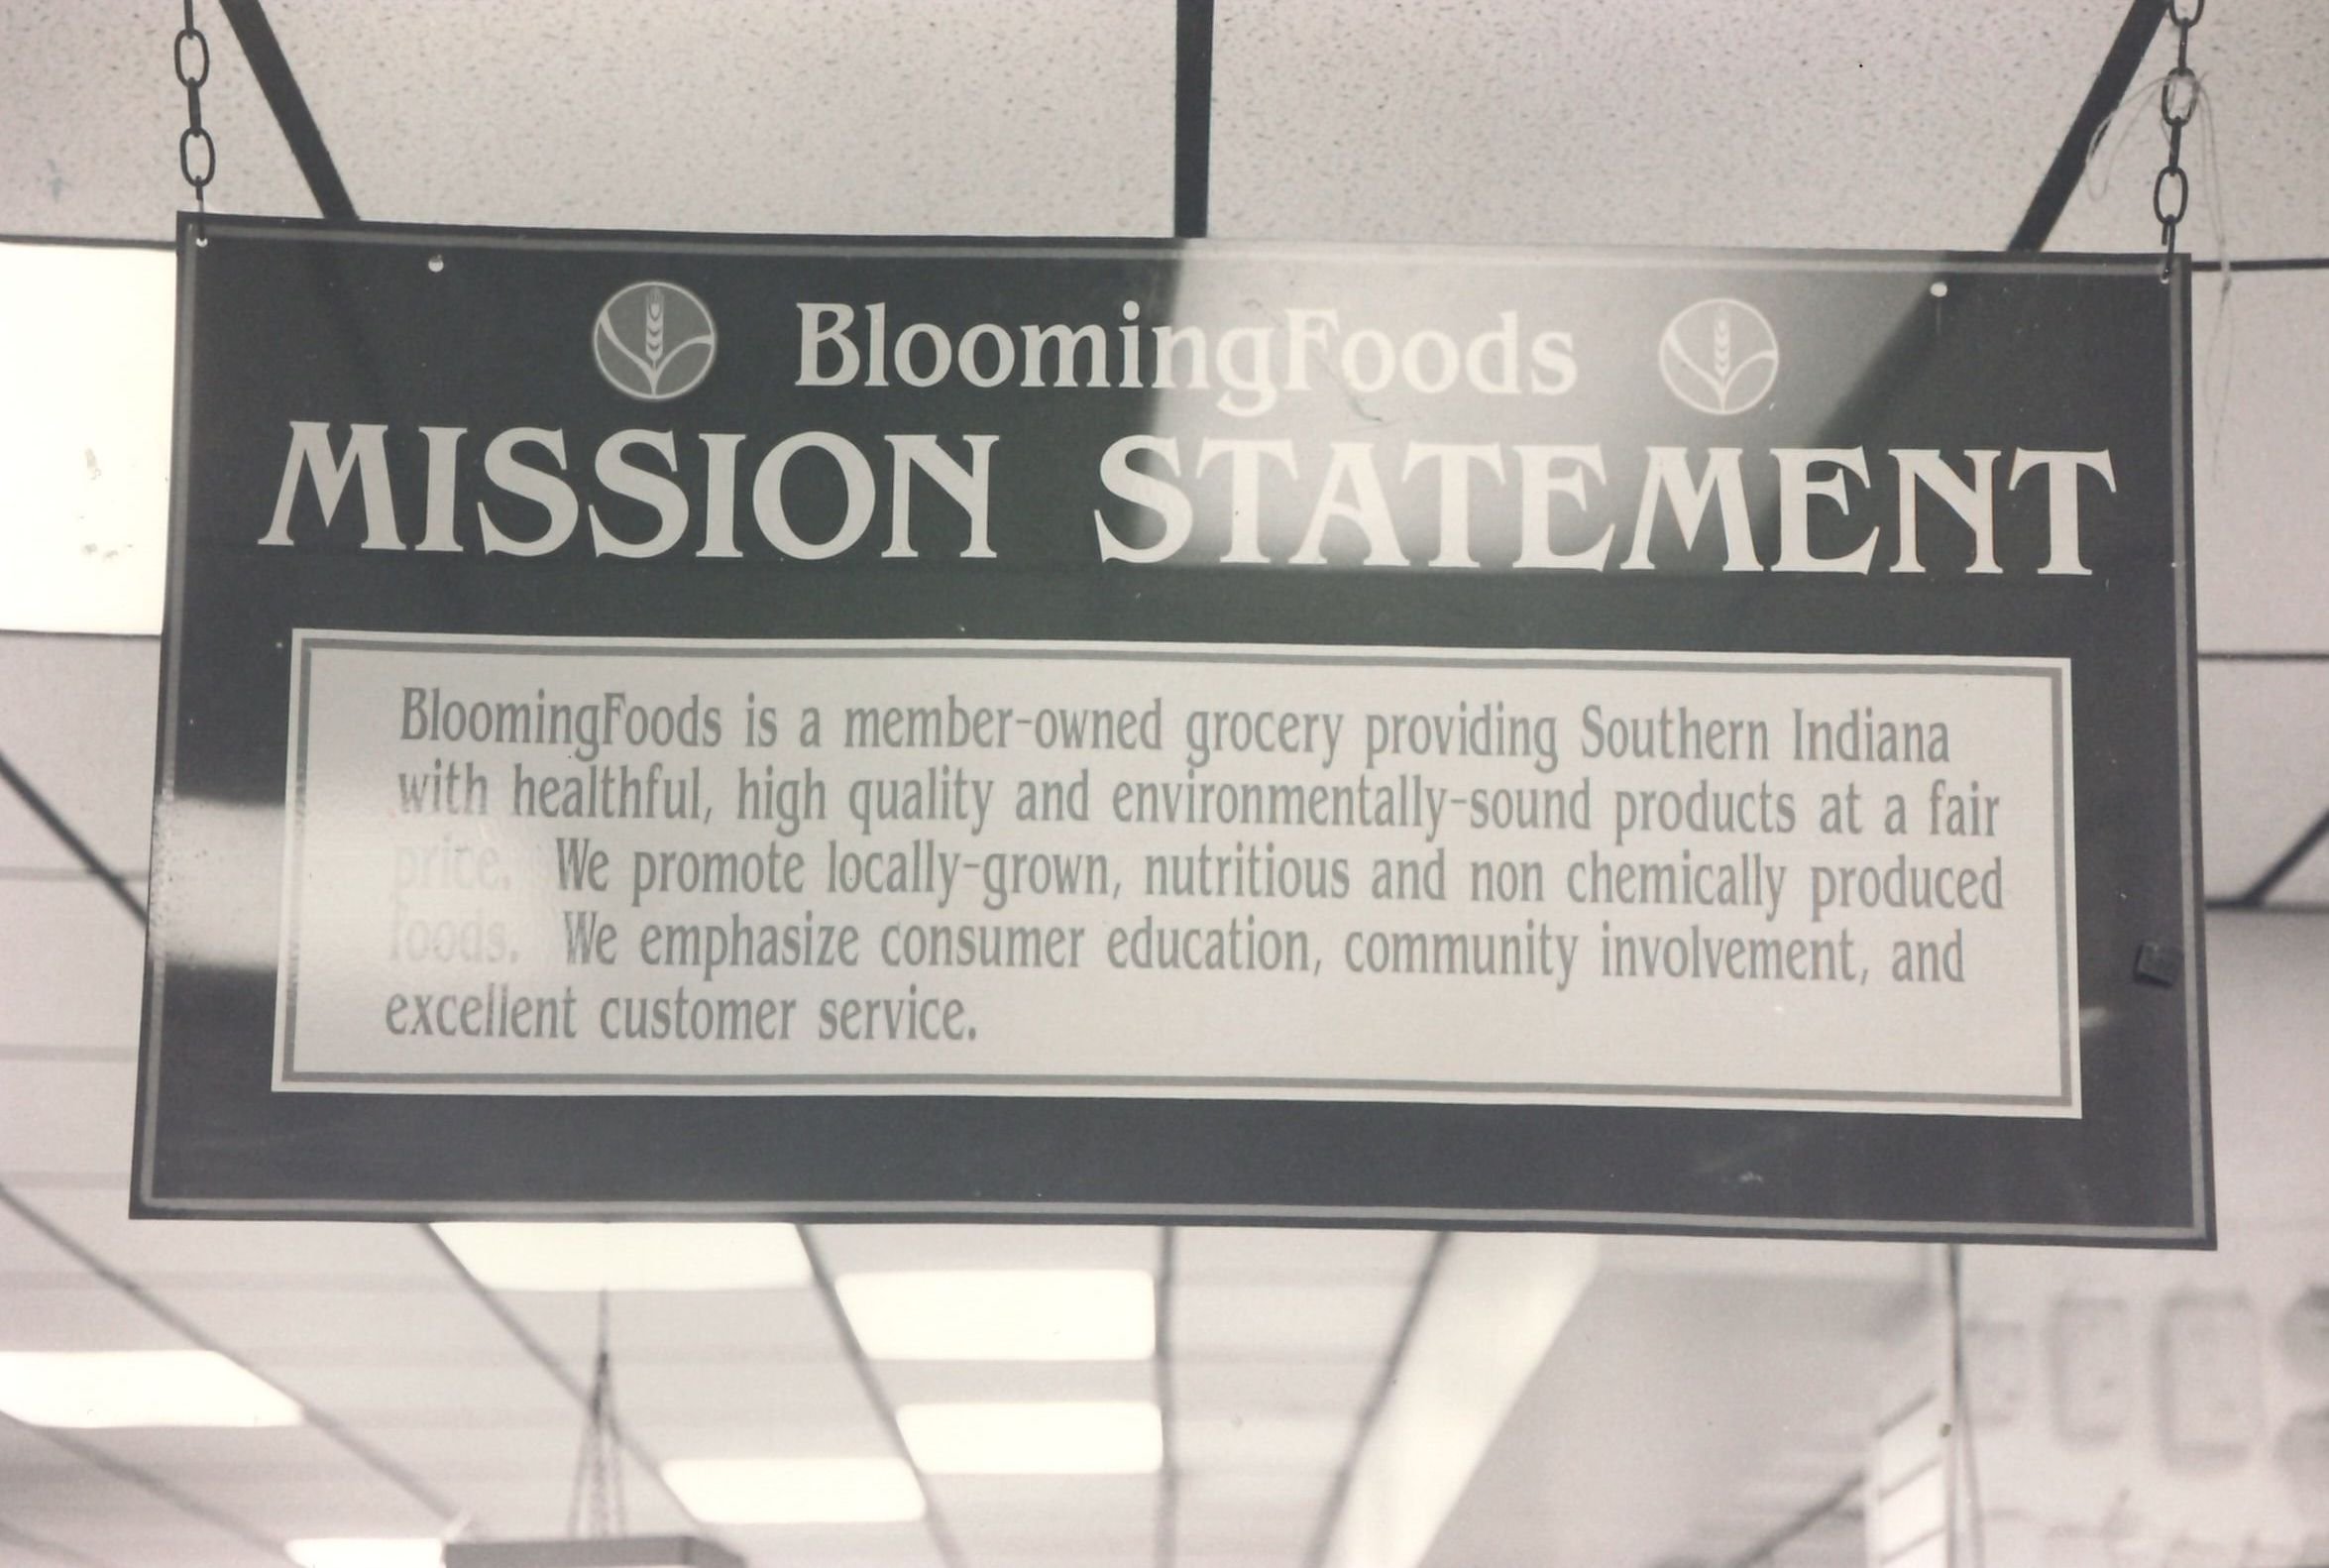 Bloomingfoods Mission Statement at the East Store